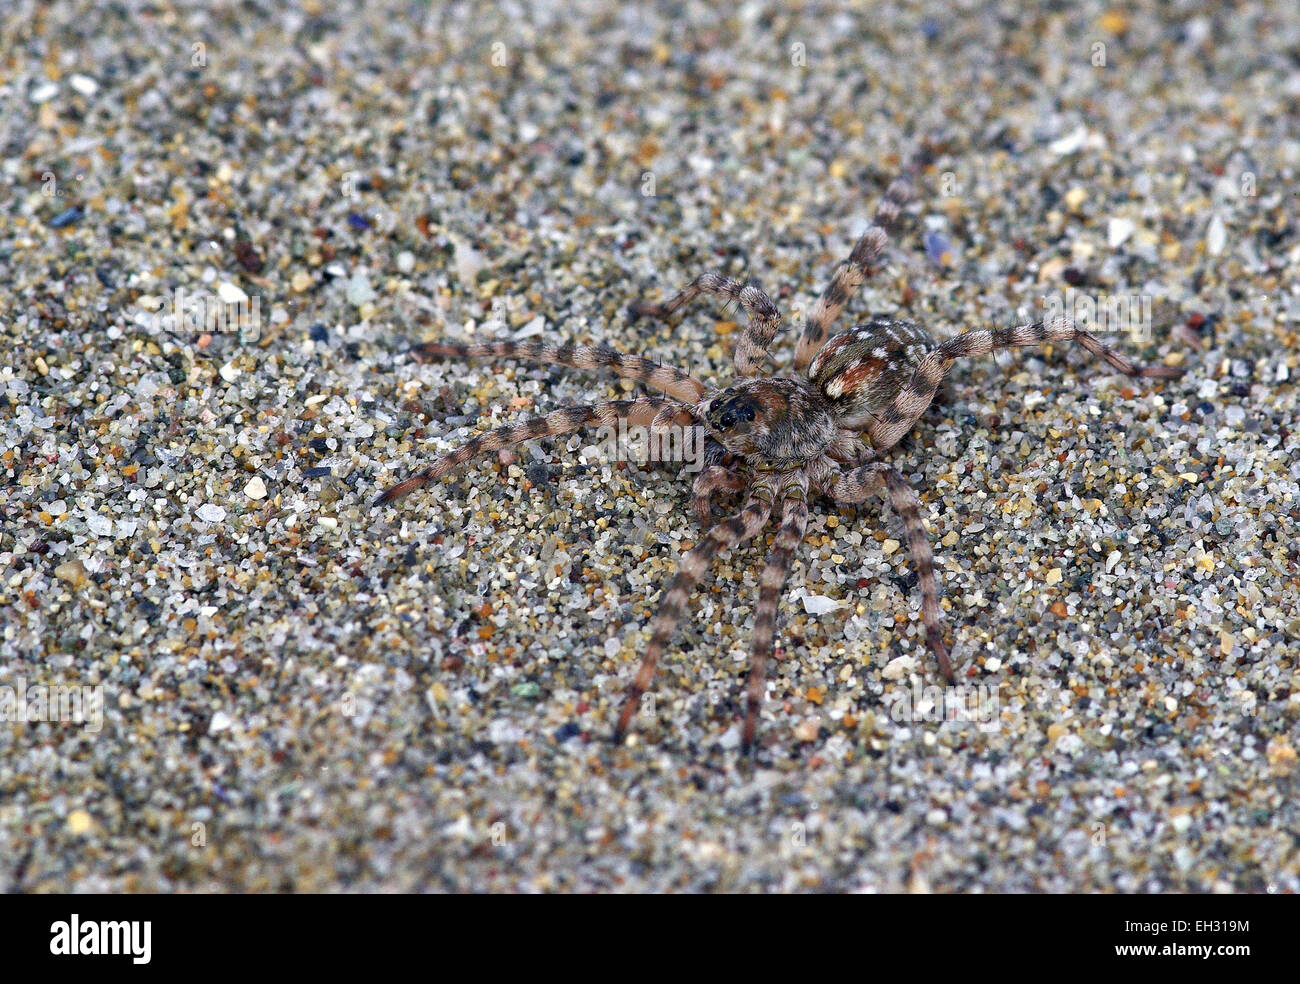 Spider Arctosa cinerea, camouflaged among the sand Stock Photo